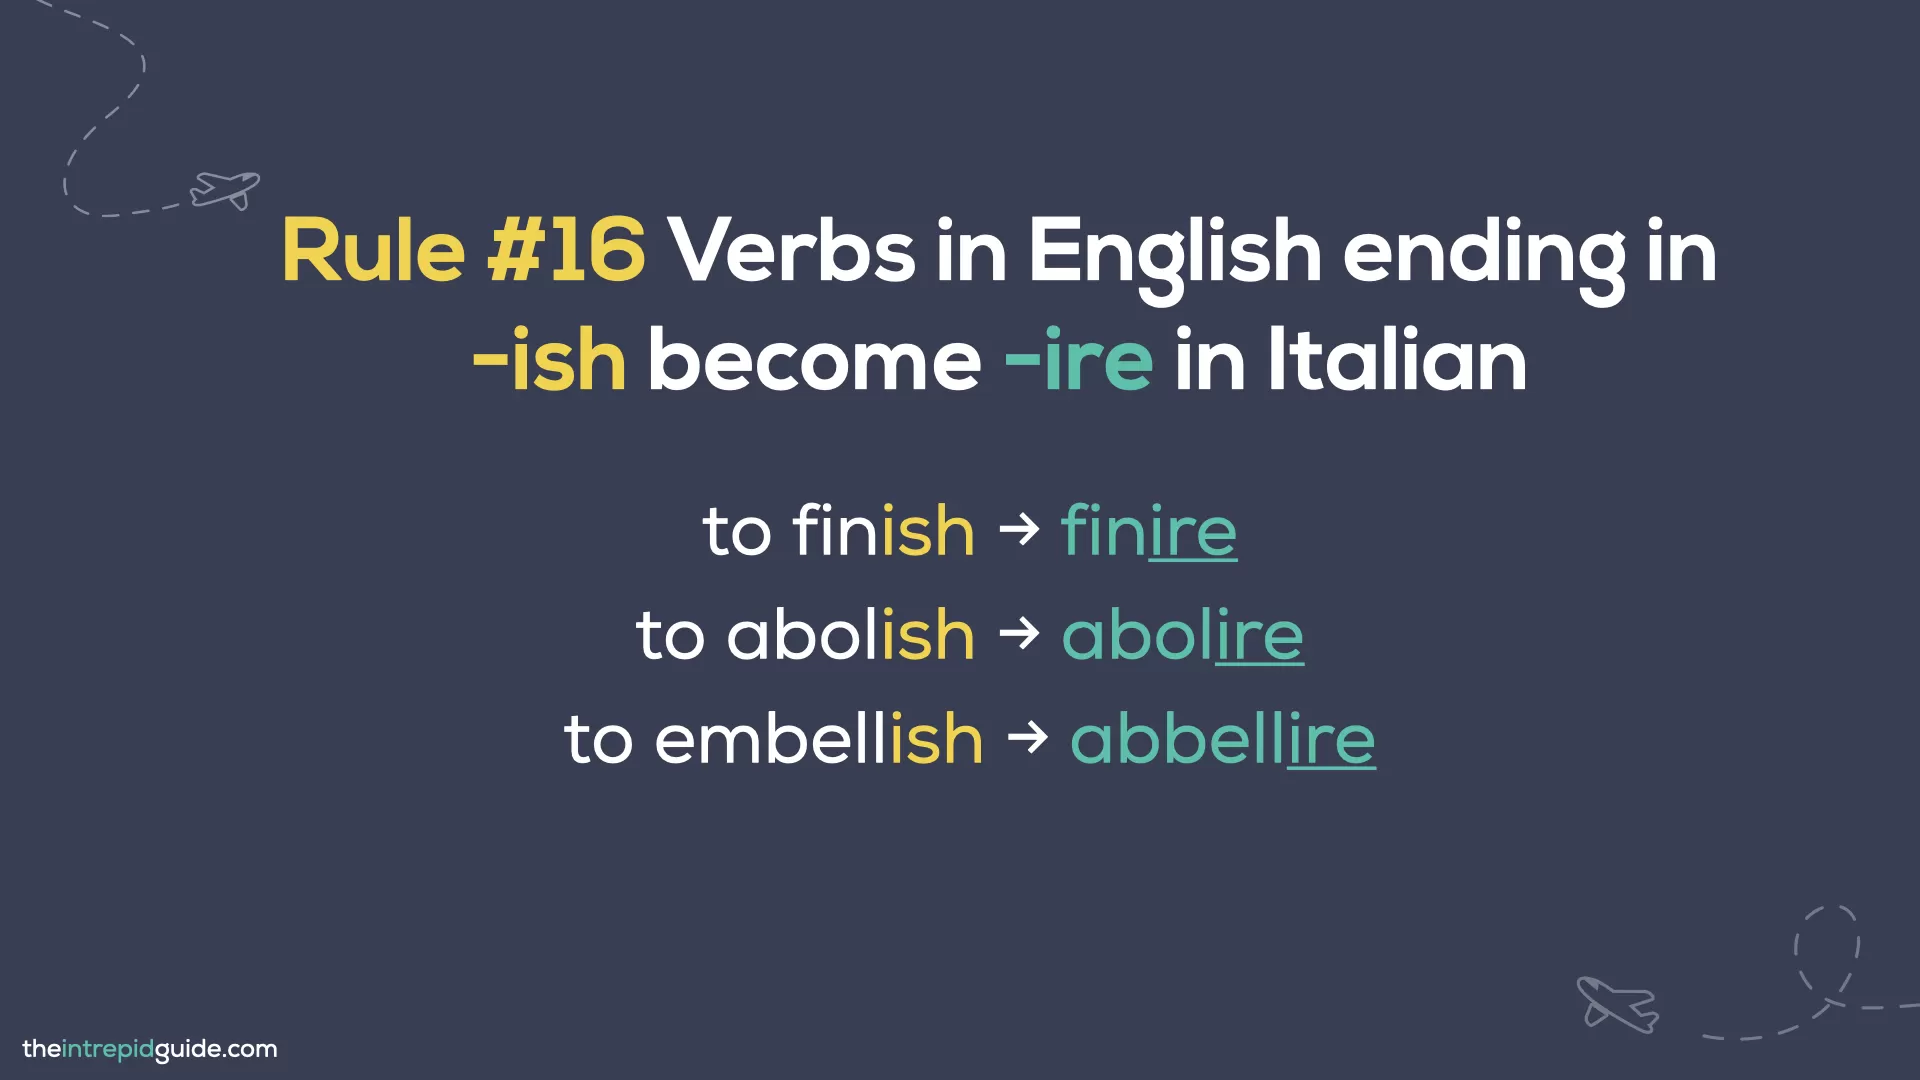 Italian cognates and loan words - Rule 16 - Verbs in English ending in -ish become -ire in Italian